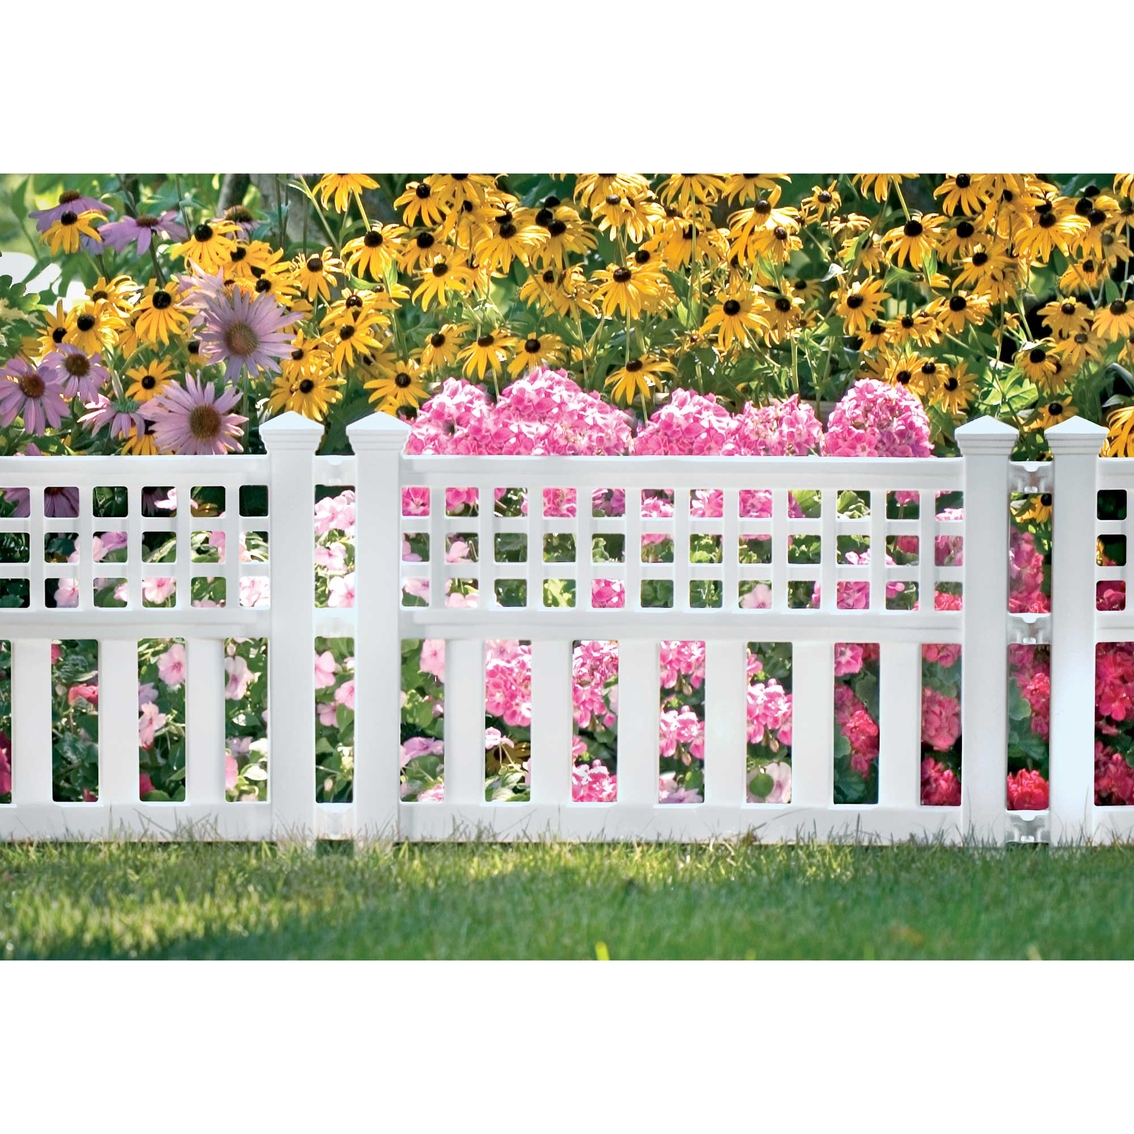 Suncast Grand View Garden Border Fencing, 1 section - Image 2 of 2